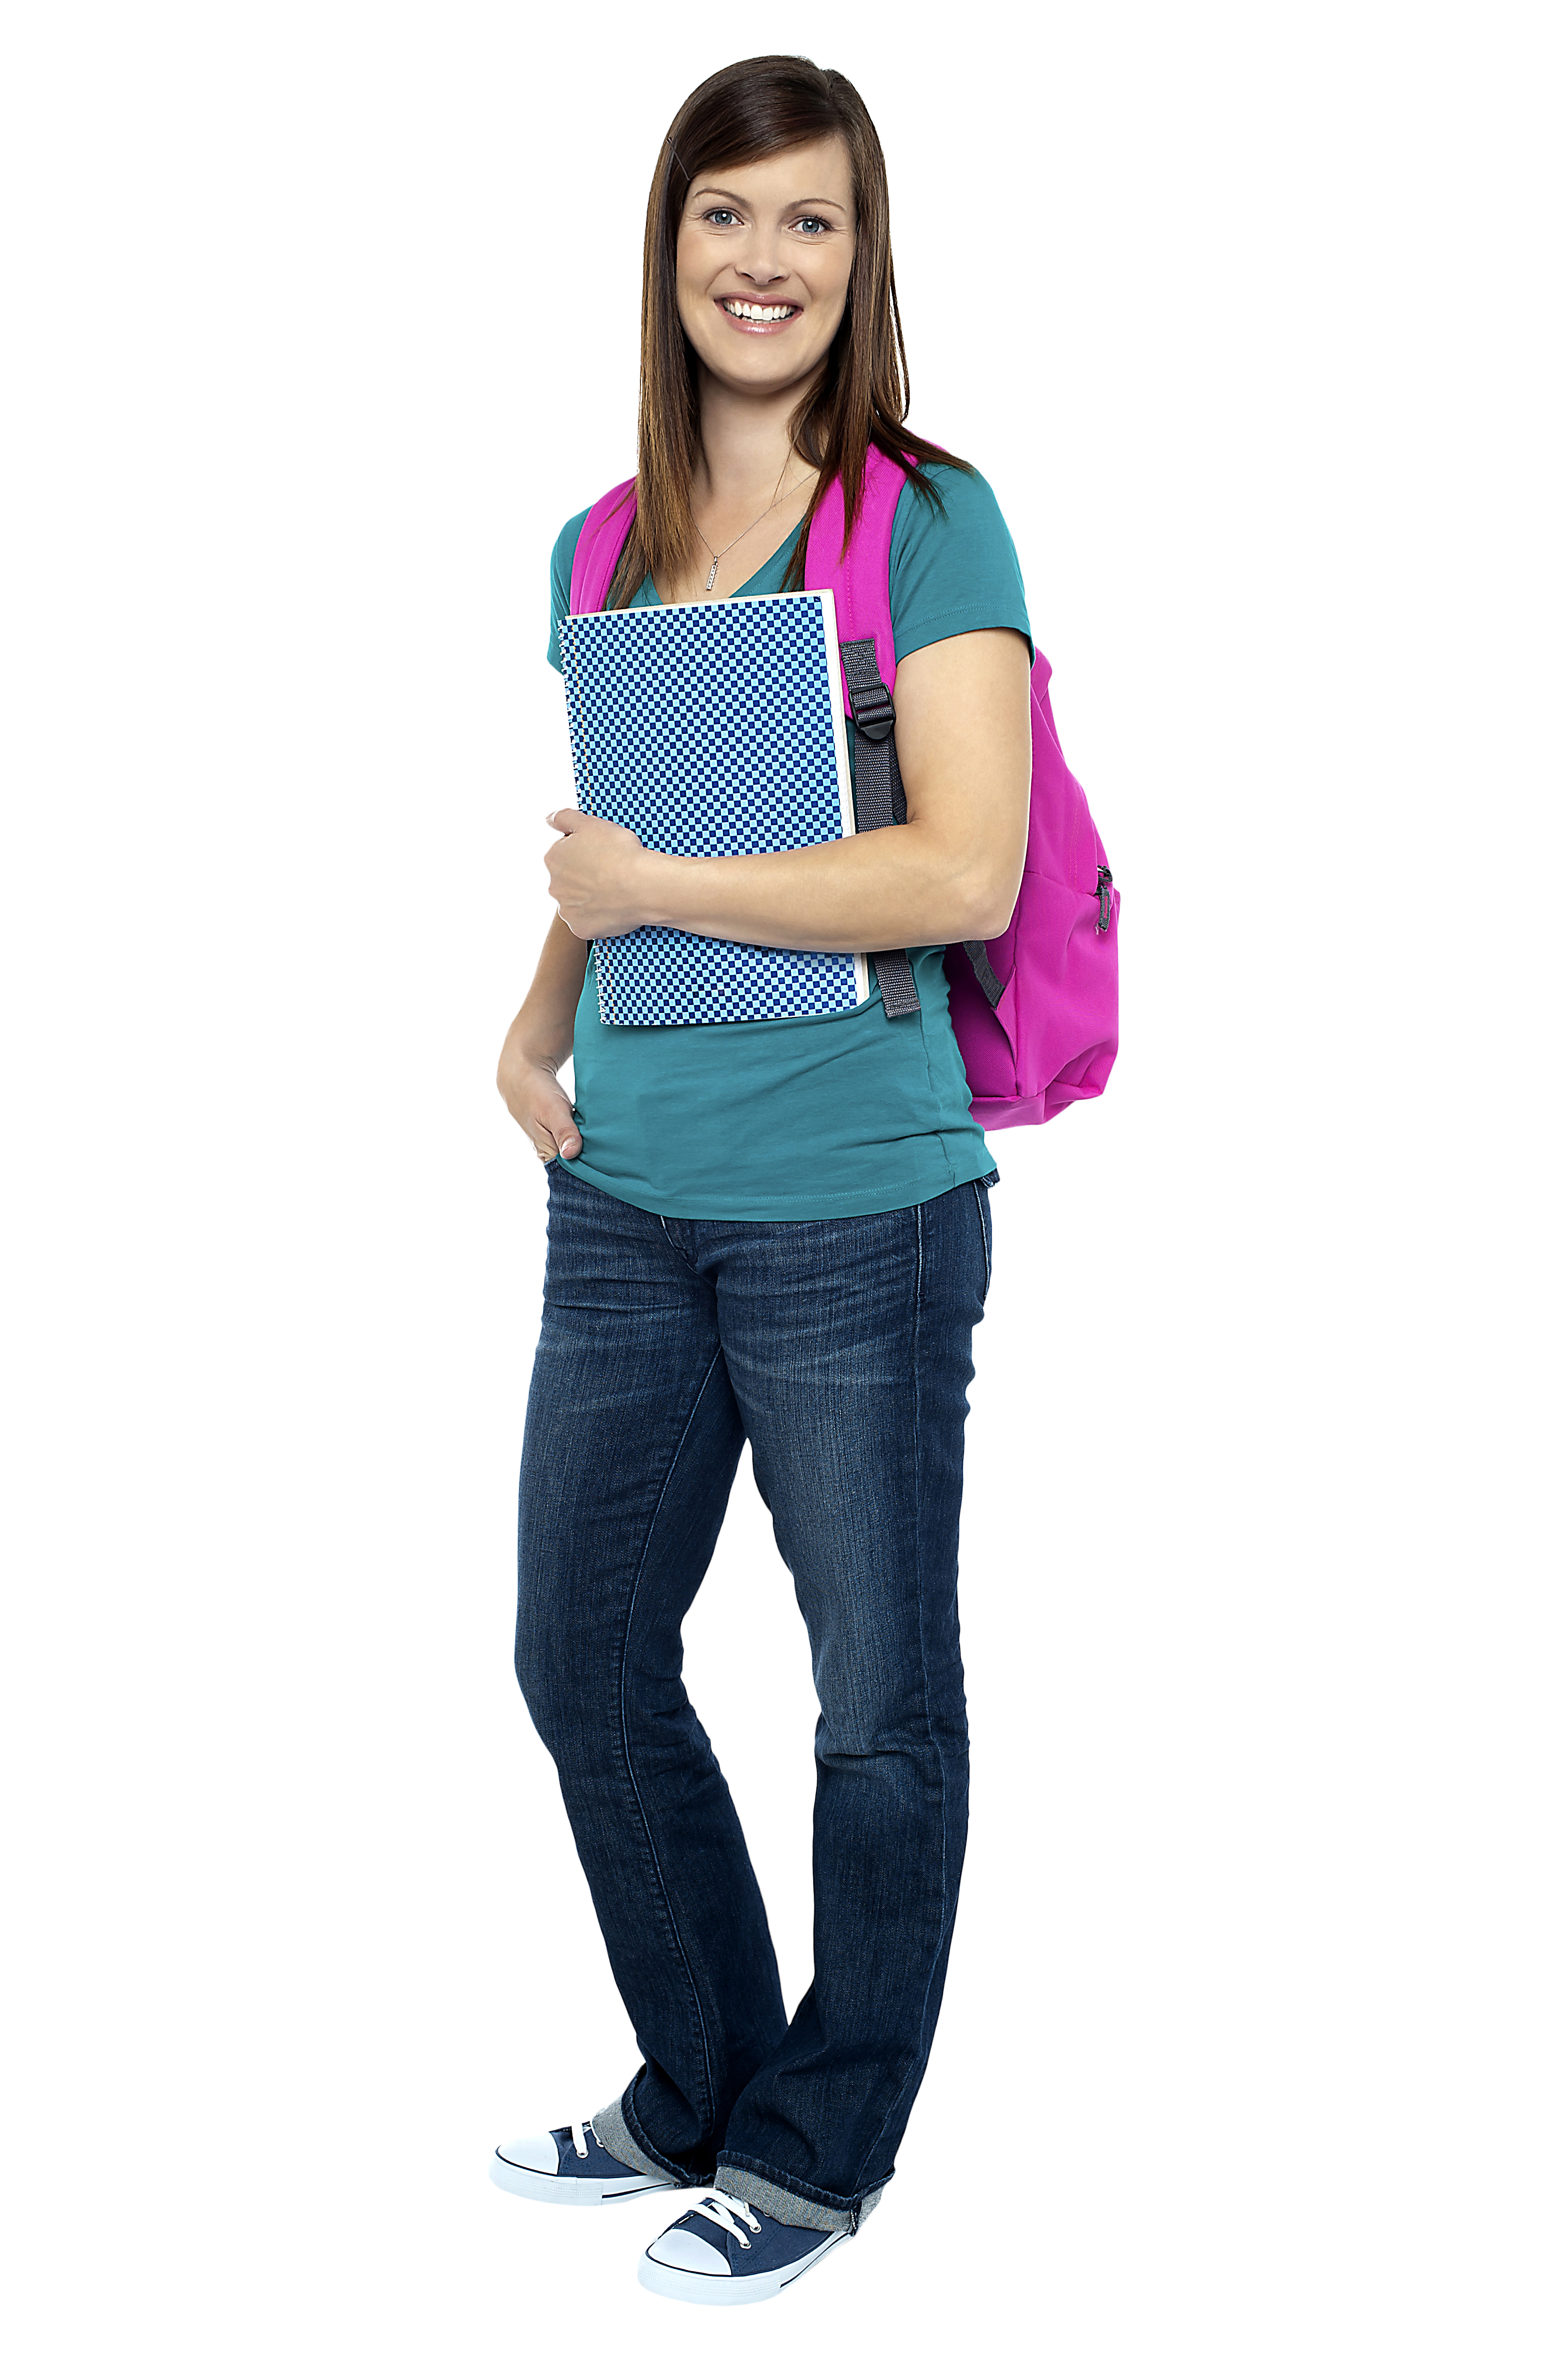 Young Girl Student PNG Image - PurePNG | Free transparent CC0 PNG Image